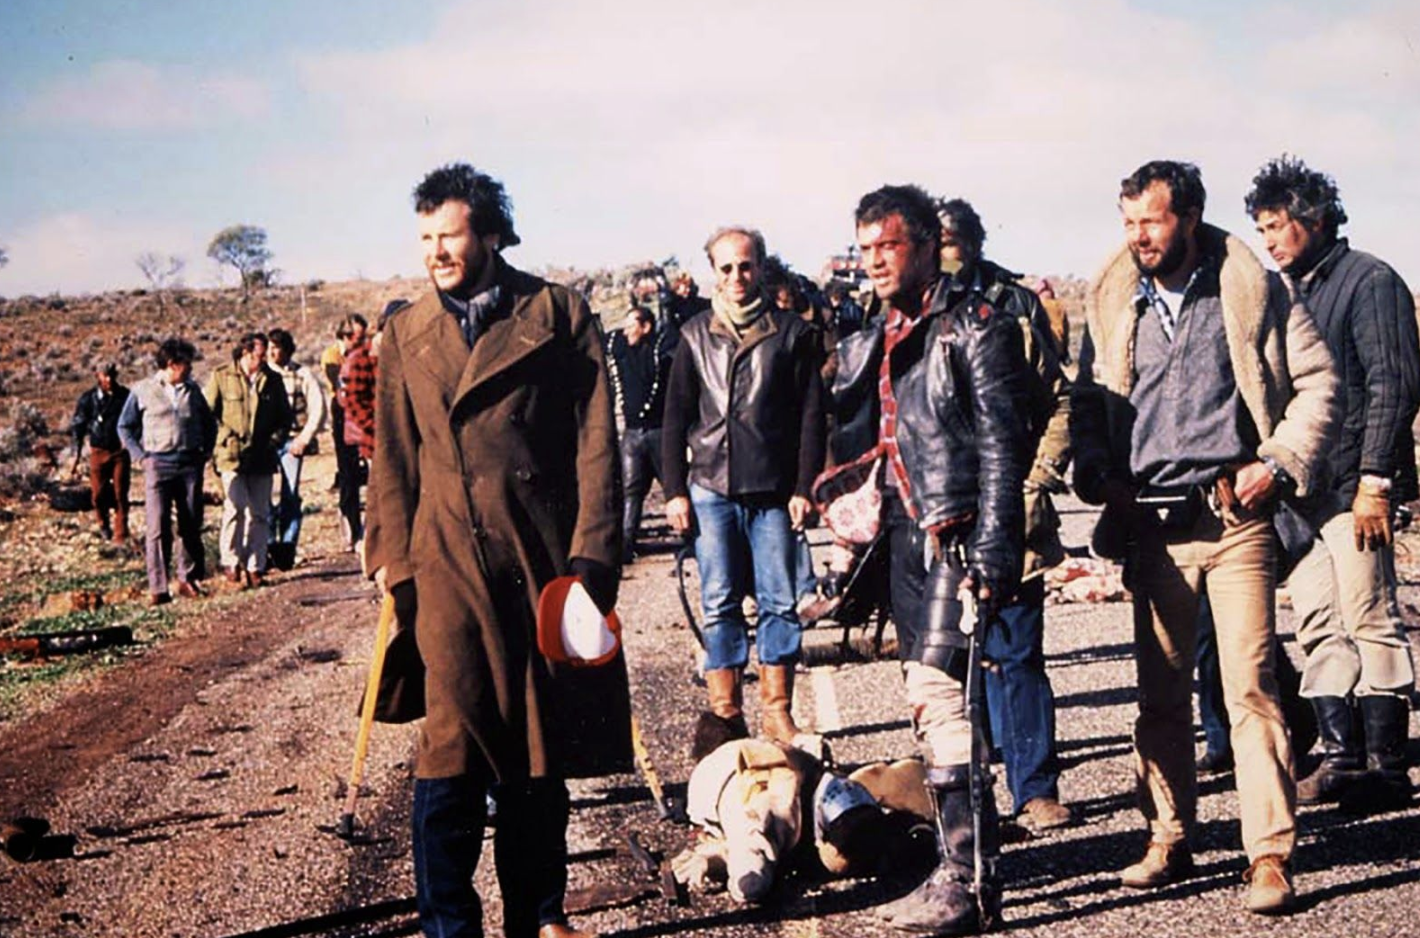 Behind the scenes of "Mad Max 2", circa 1981